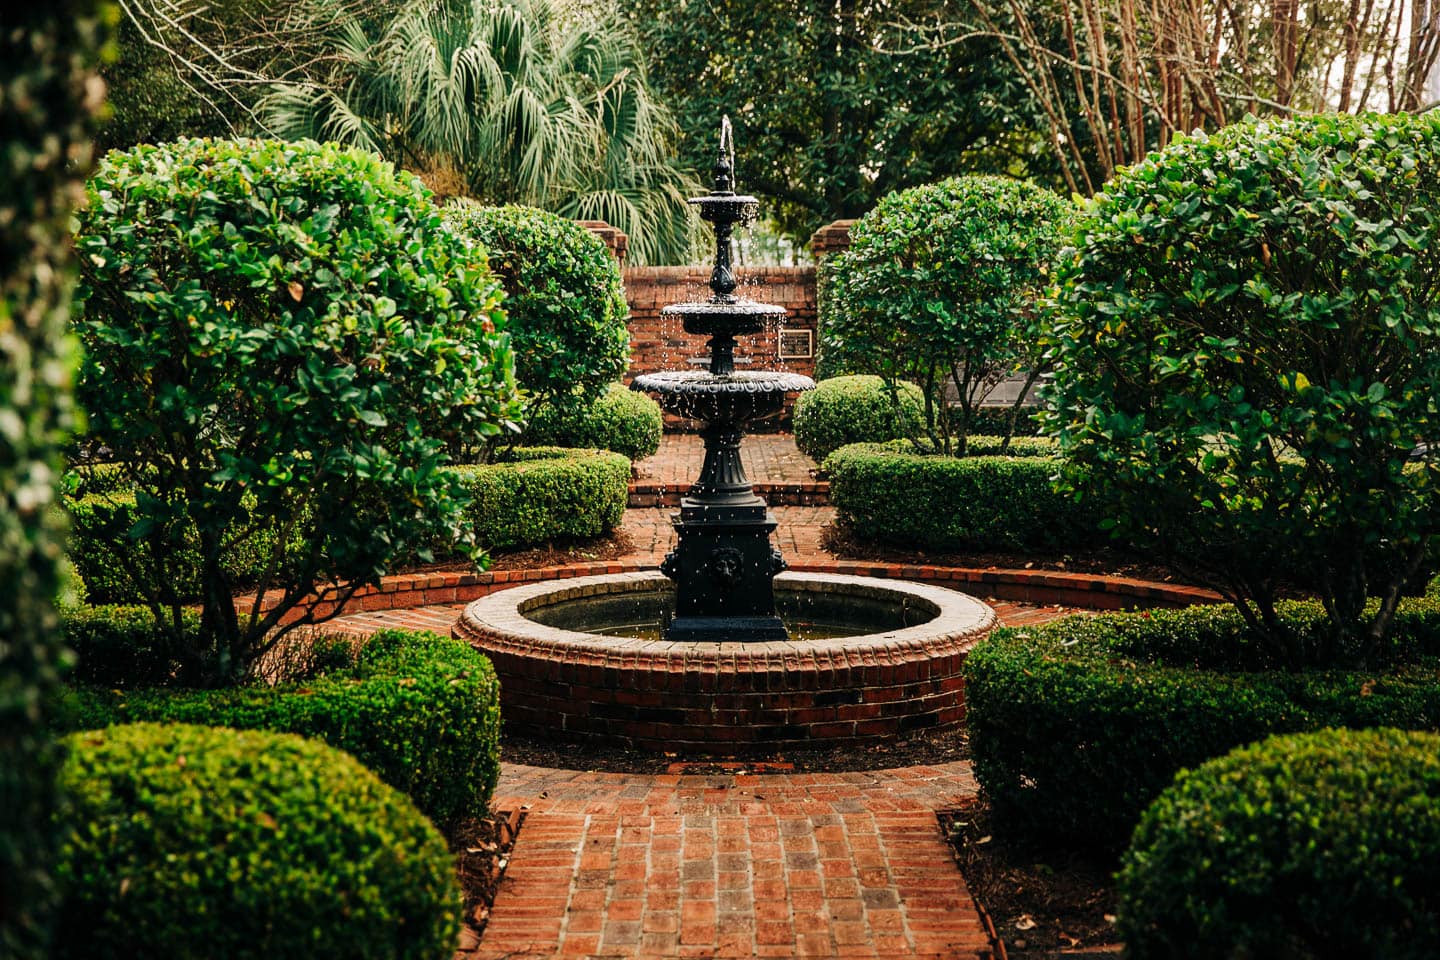 A fountain in the middle of a paved path with clipped hedges and trees on either side